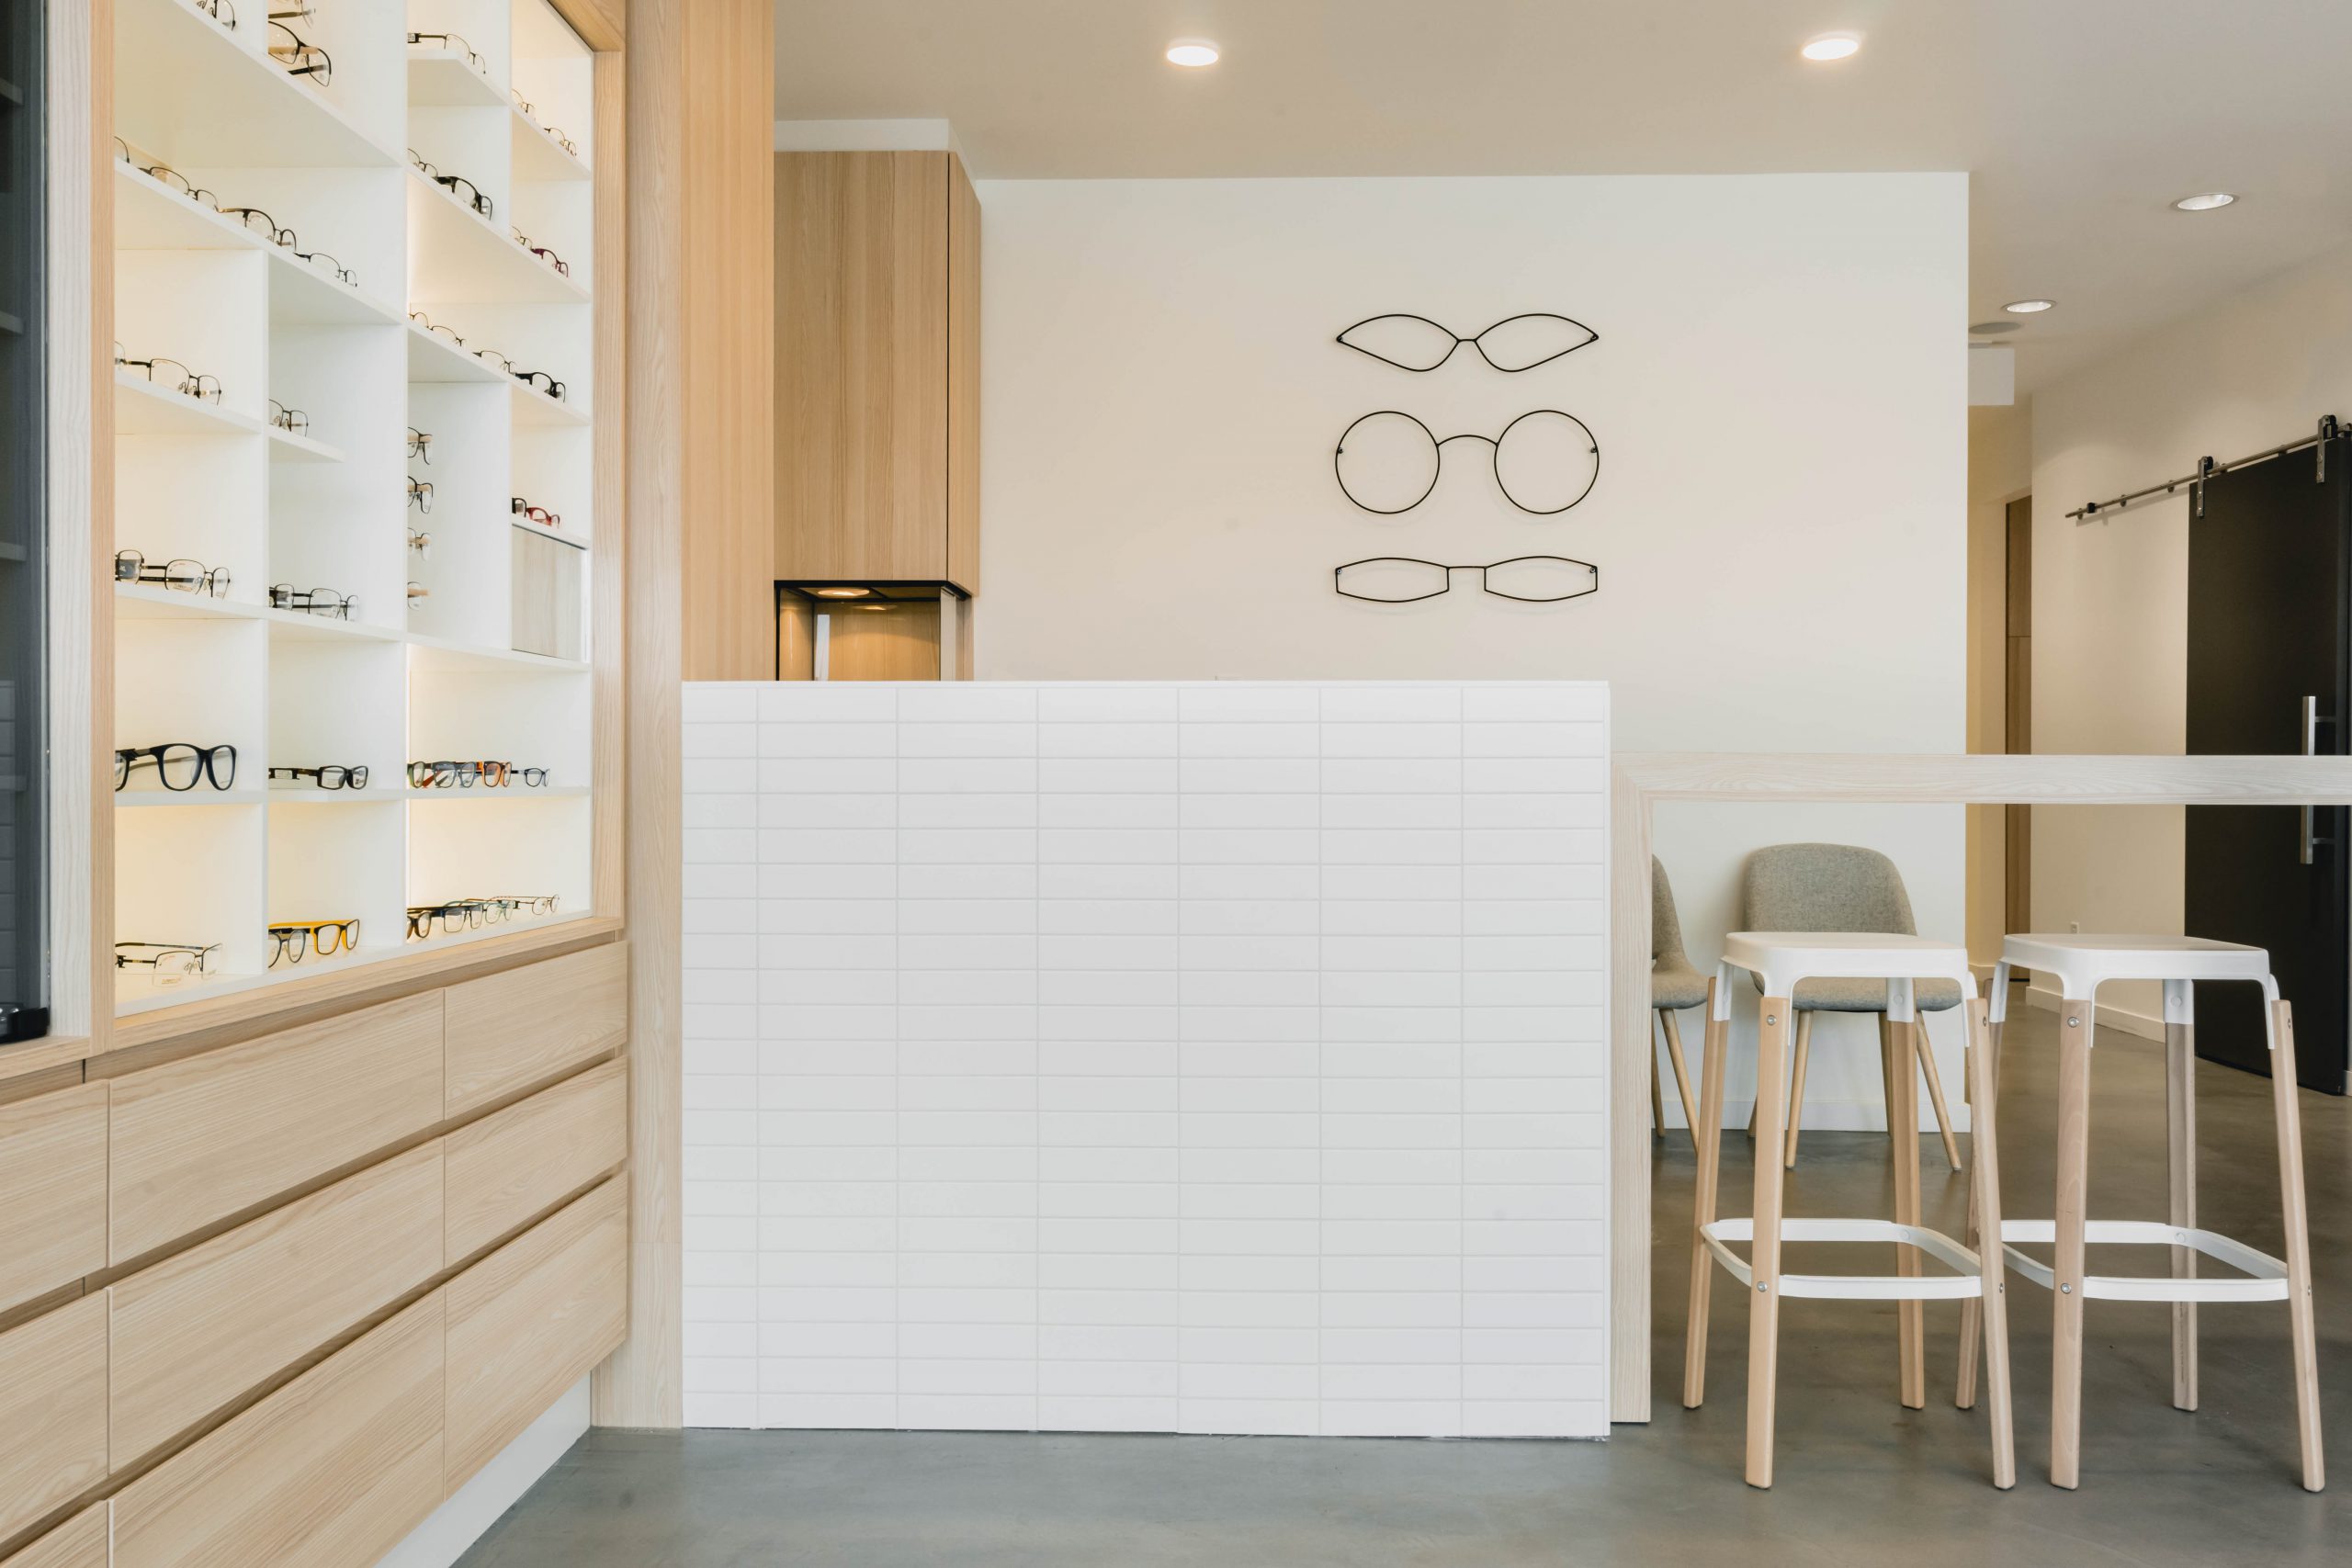 Boardwalk Optometry in Surrey BC Retail Optometry Interior Design Desk and Stools by Cutler